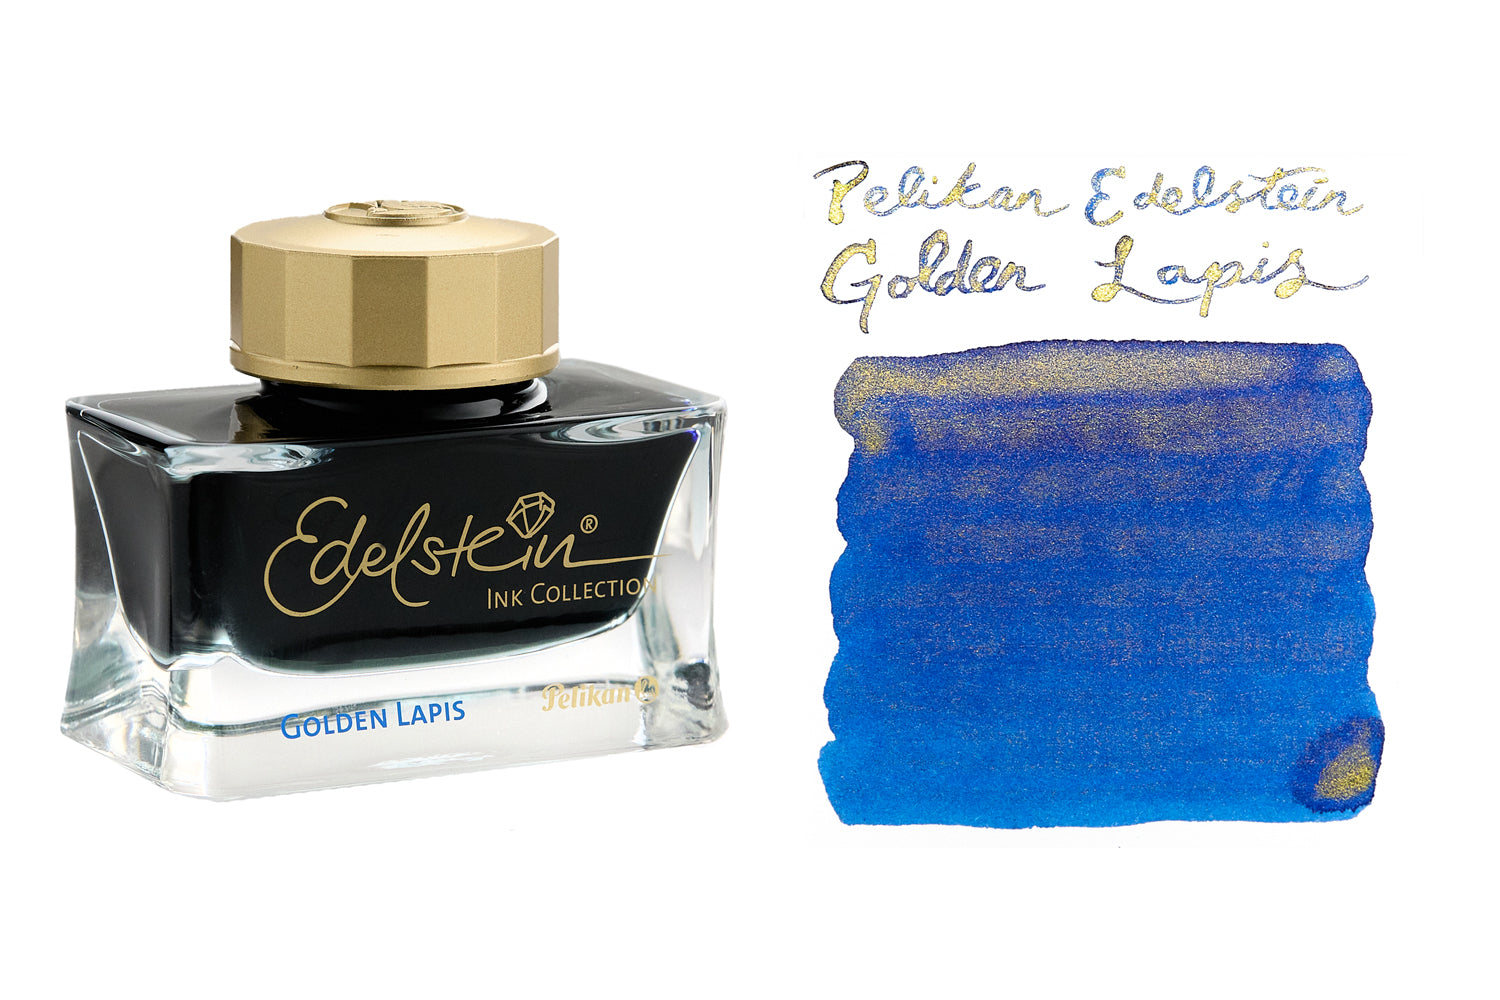 Pelikan Edelstein Golden Lapis fountain pen ink bottle and swab with text above the swab with the name of the ink